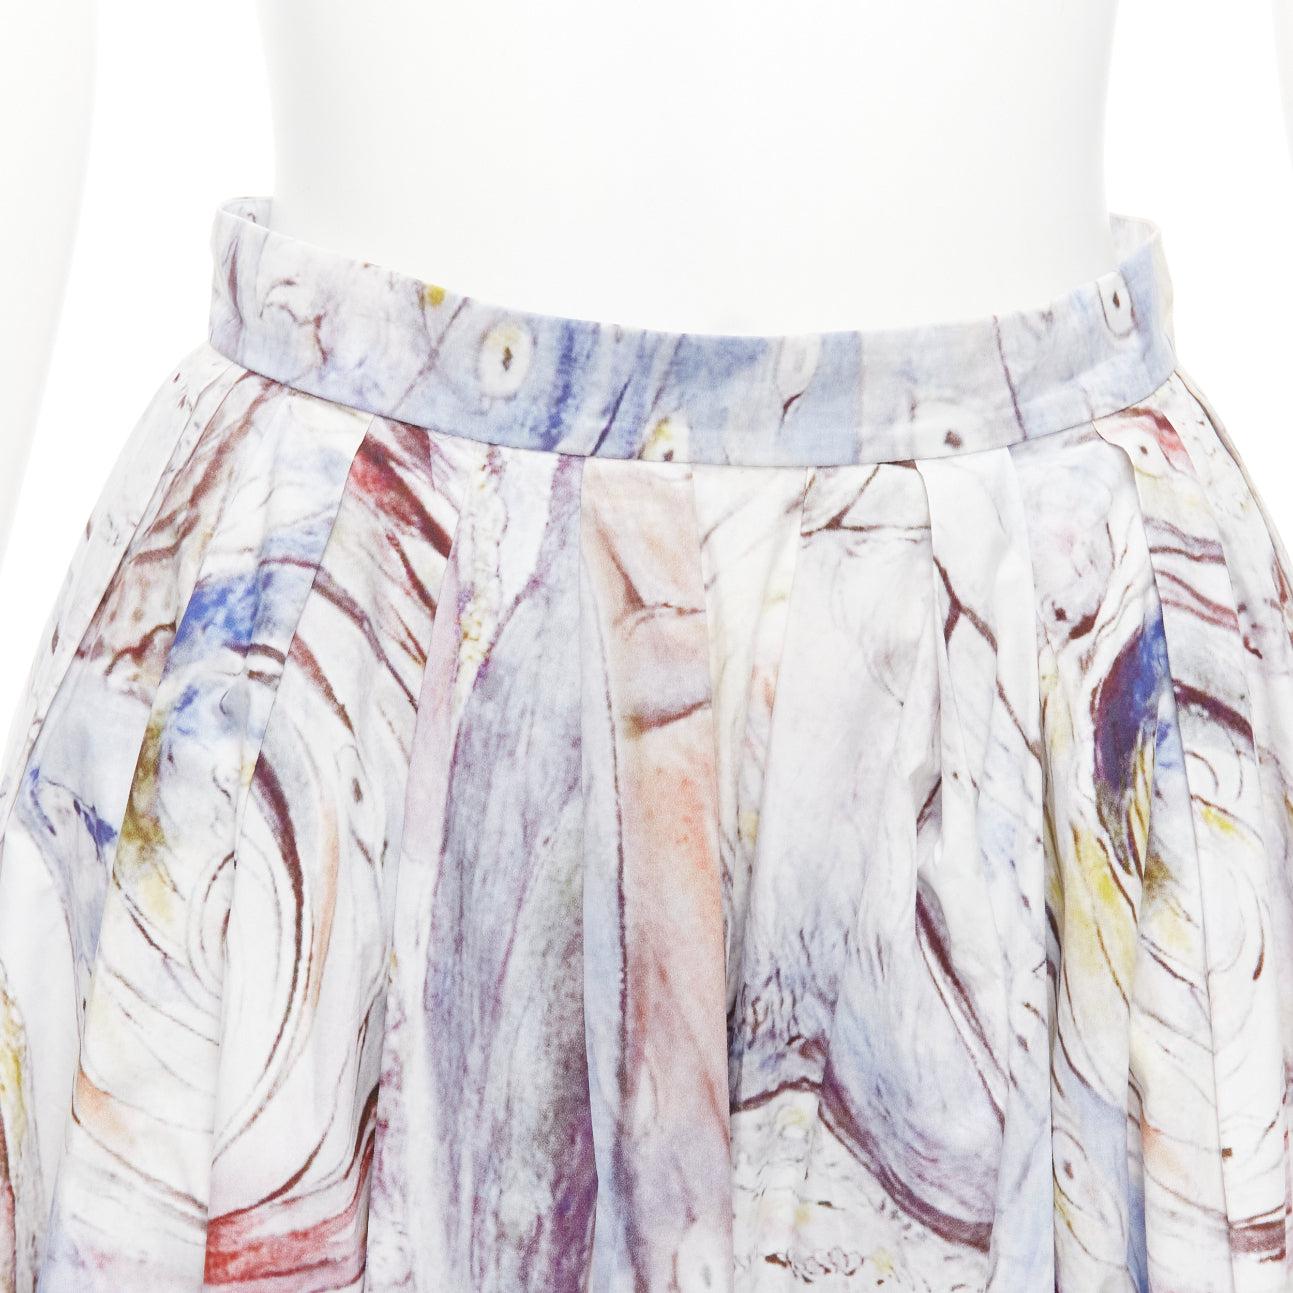 ALEXANDER MCQUEEN 2021 William Blake Dante print light cotton midi skirt IT38 S
Reference: AAWC/A00603
Brand: Alexander McQueen
Designer: Sarah Burton
Collection: 2022 William Blake
Material: Cotton
Color: Blue
Pattern: Abstract
Closure: Zip
Extra